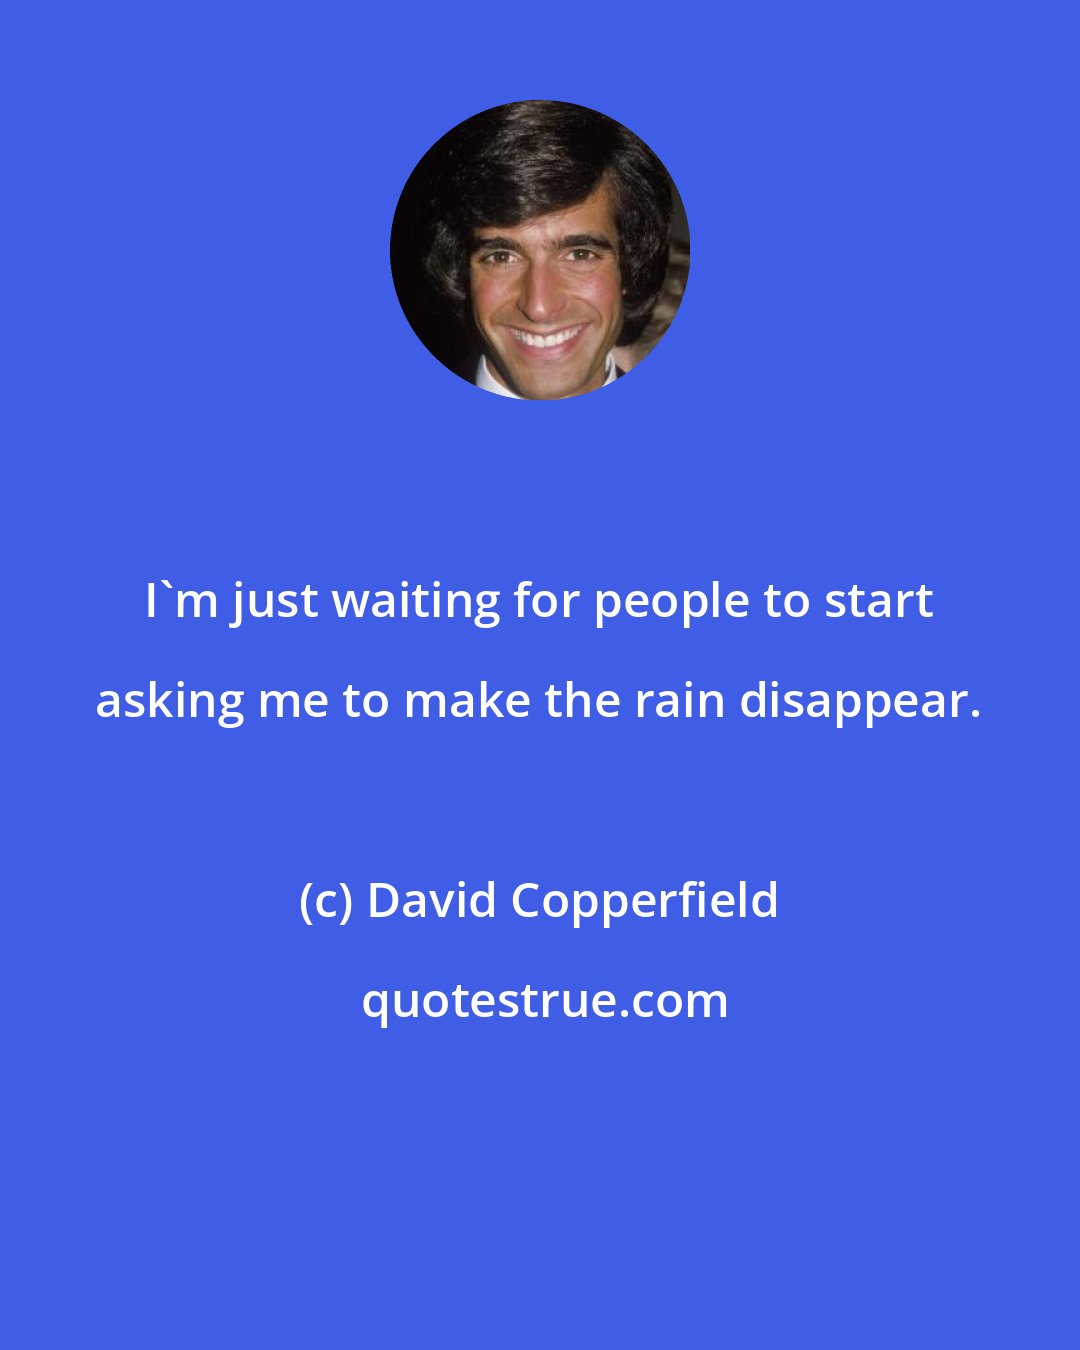 David Copperfield: I'm just waiting for people to start asking me to make the rain disappear.